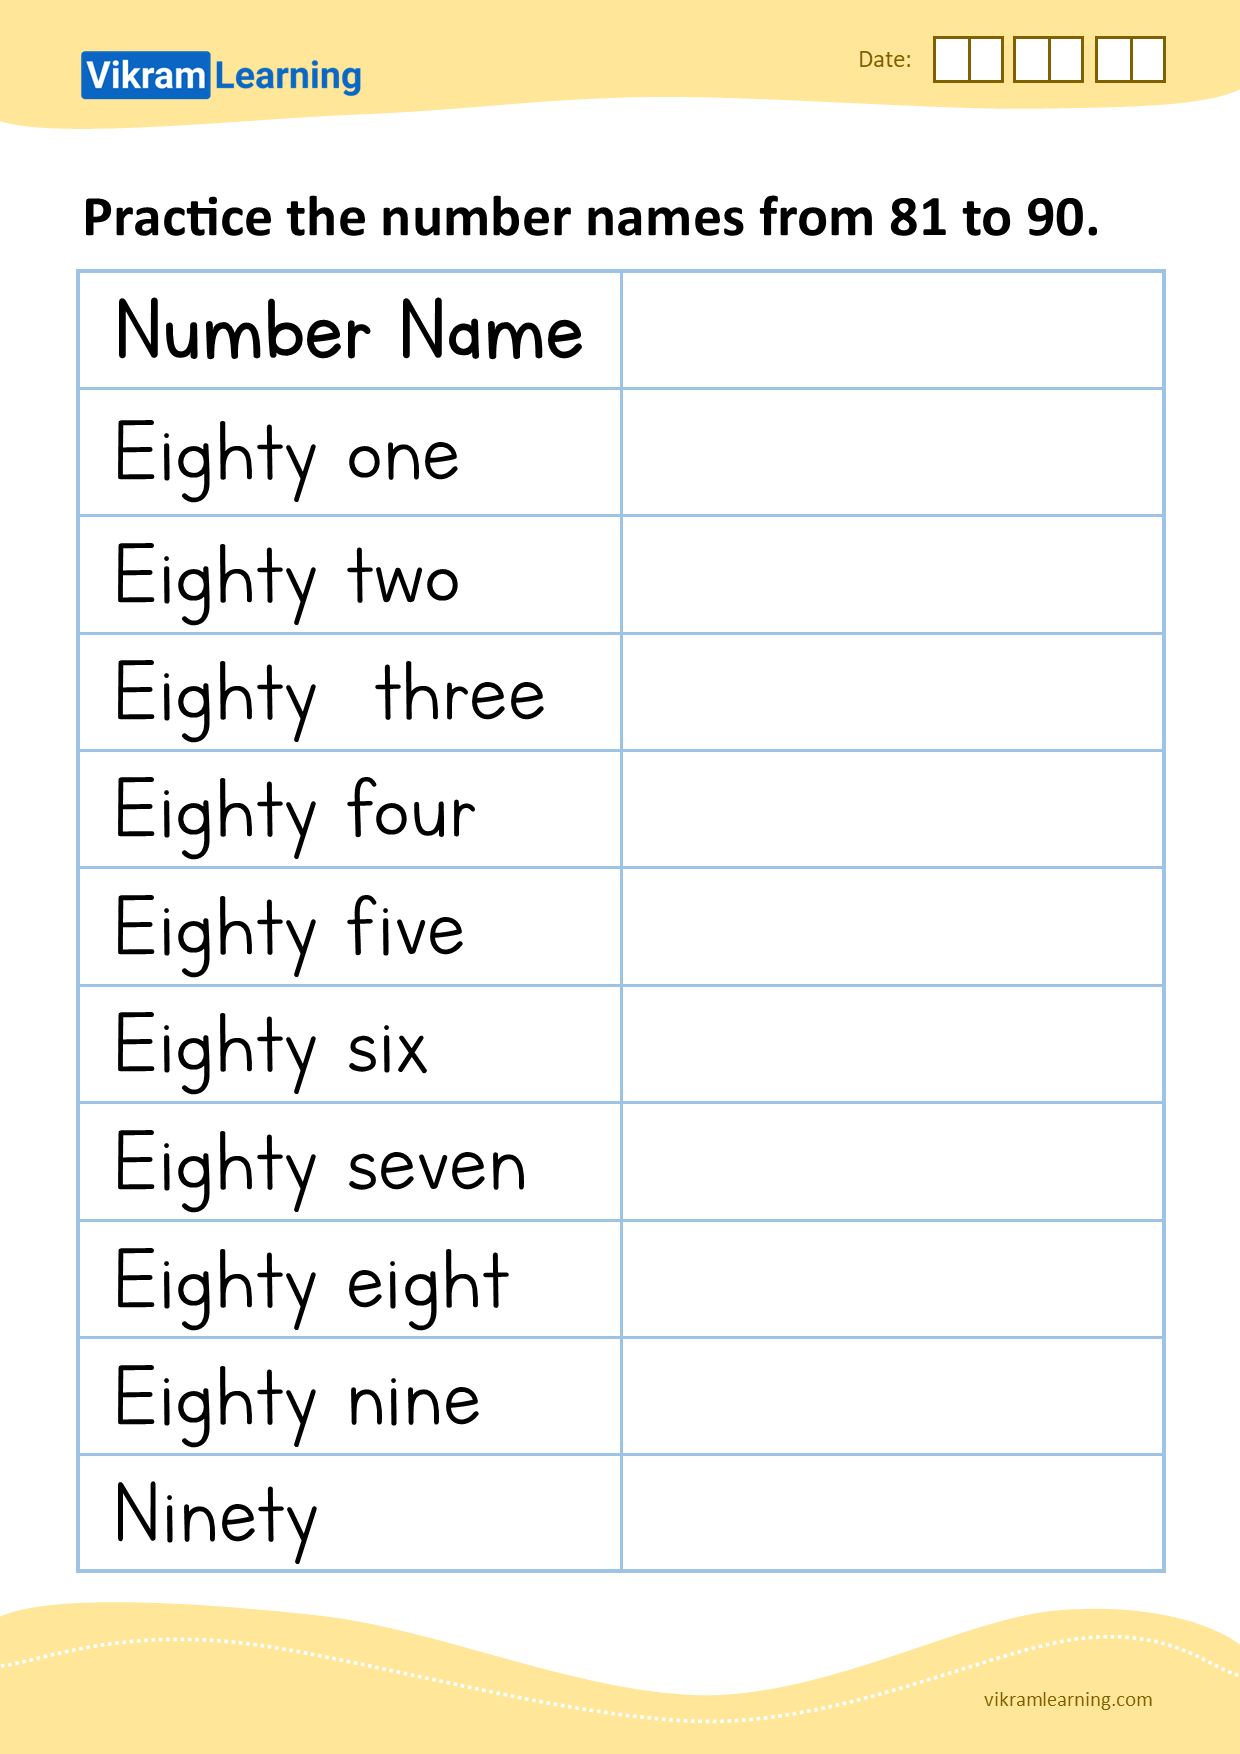 Download practice the number names from 81 to 90 worksheets